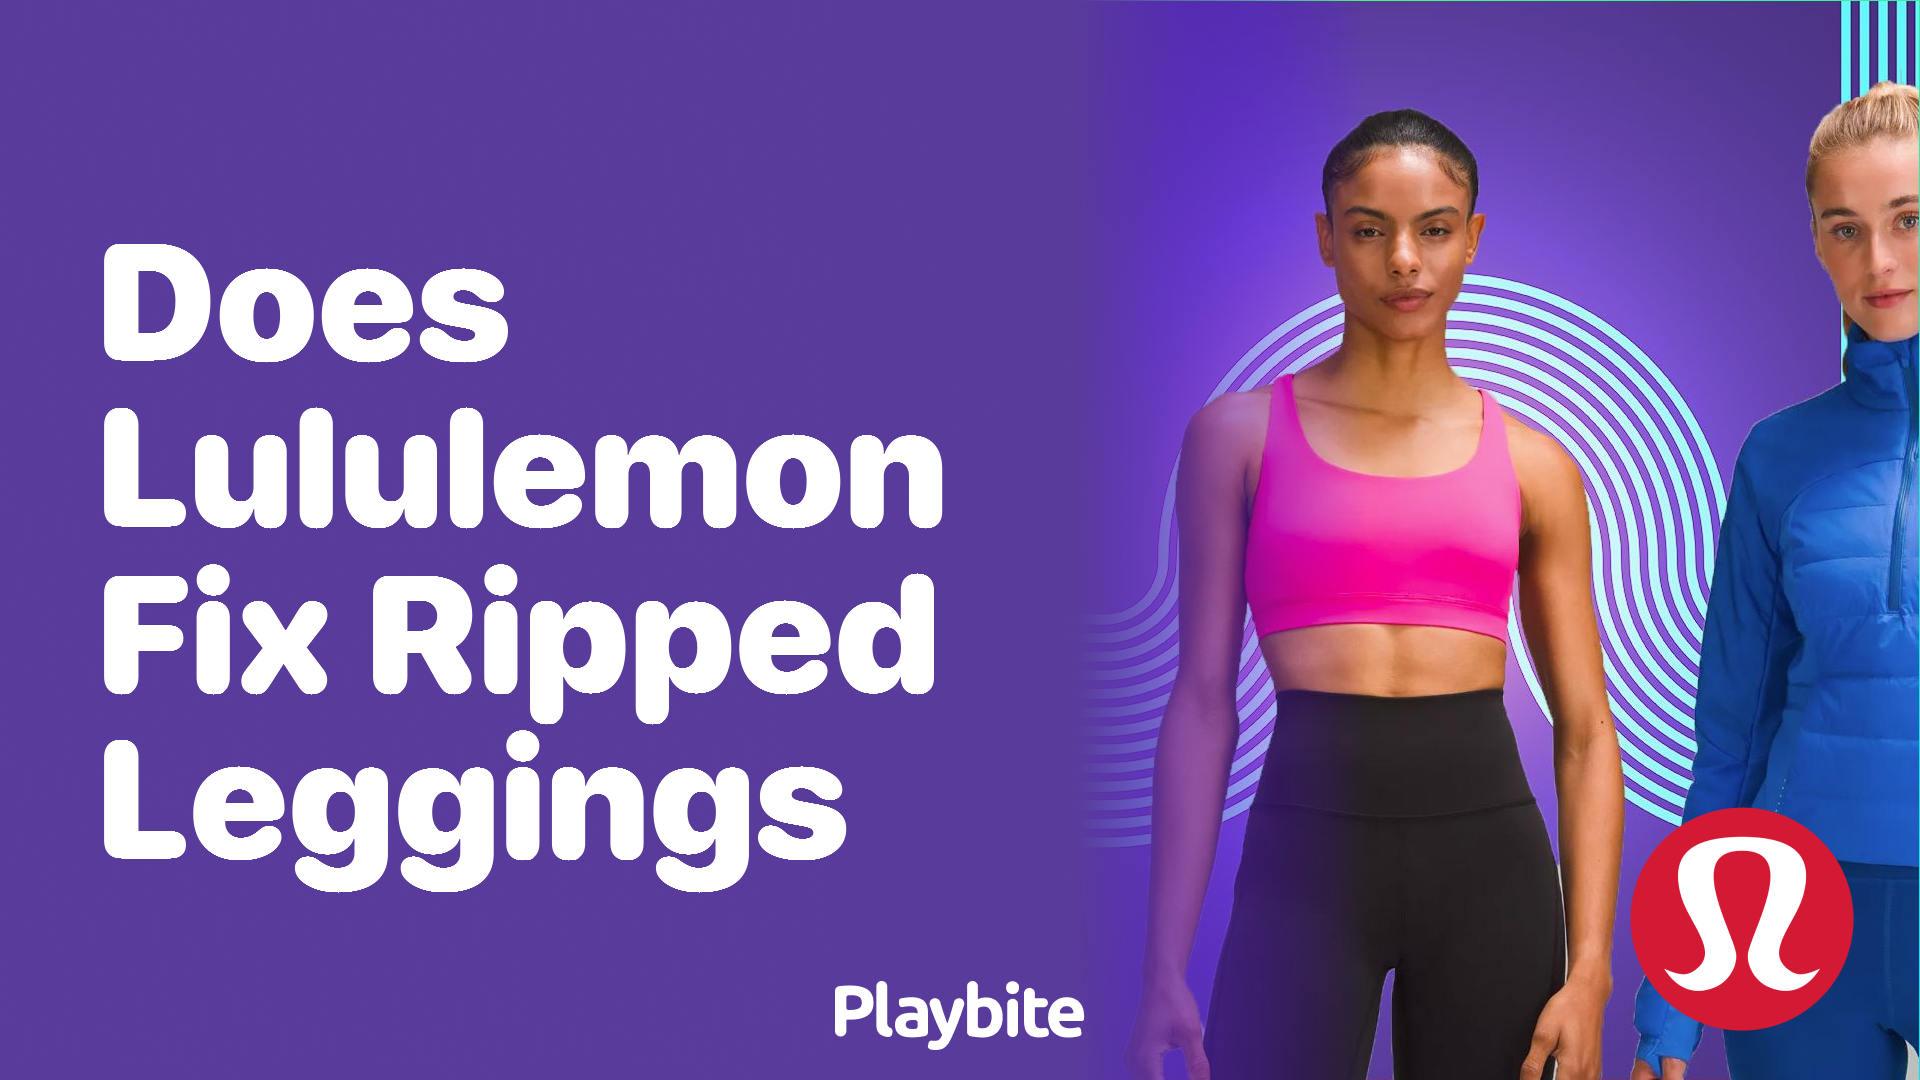 Does Lululemon Fix Ripped Leggings? Here's What You Need to Know